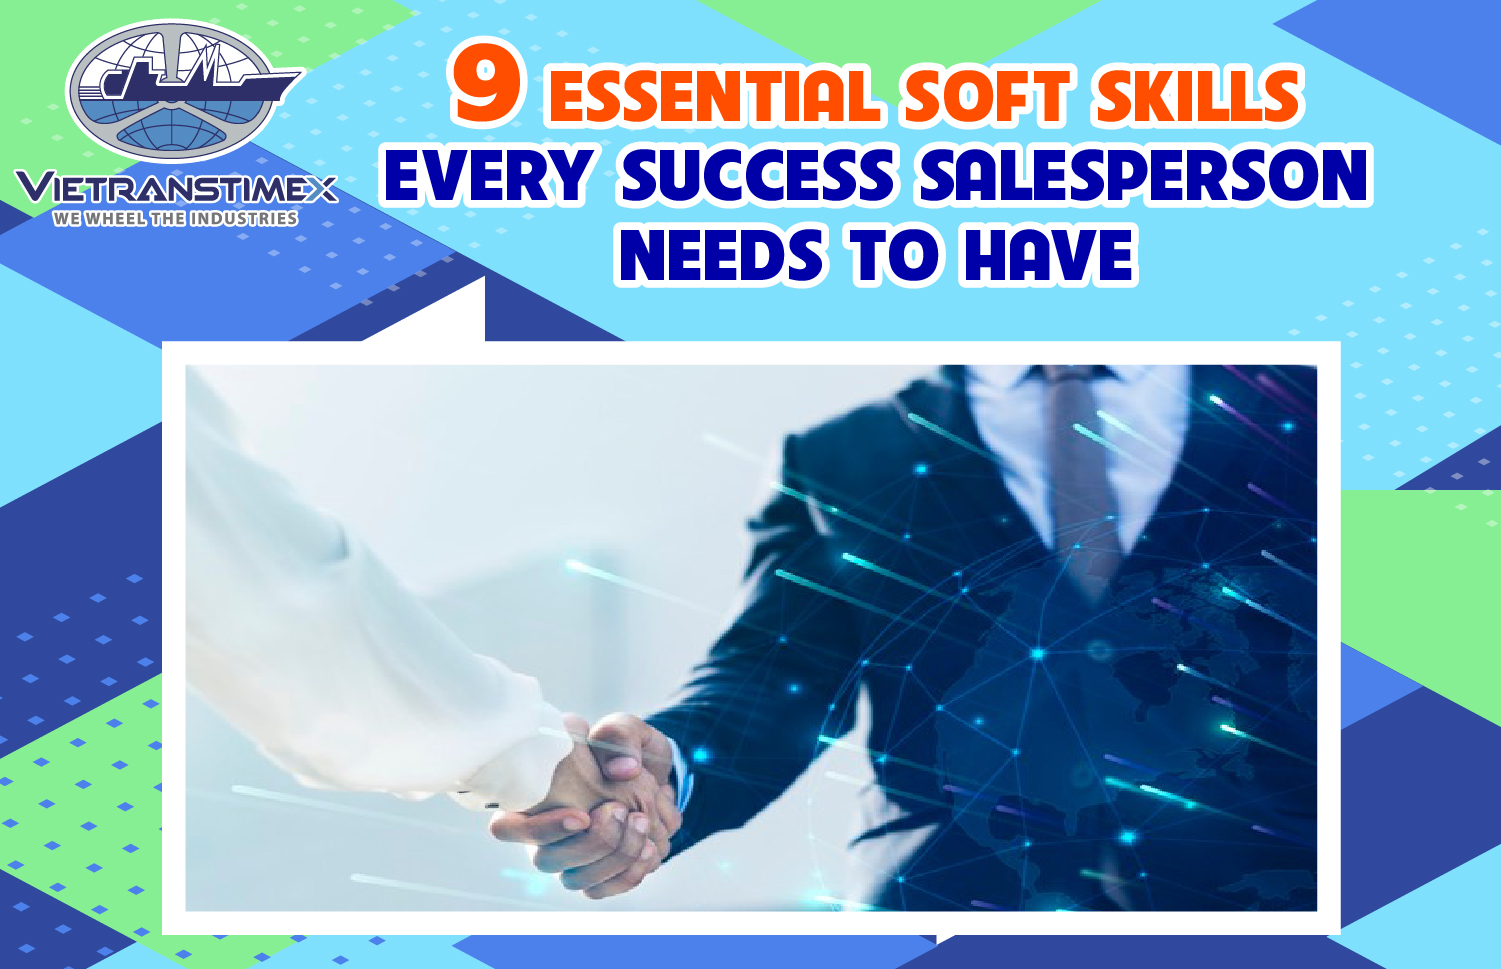 9 Essential Soft Skills Every Success Salesperson Needs To Have